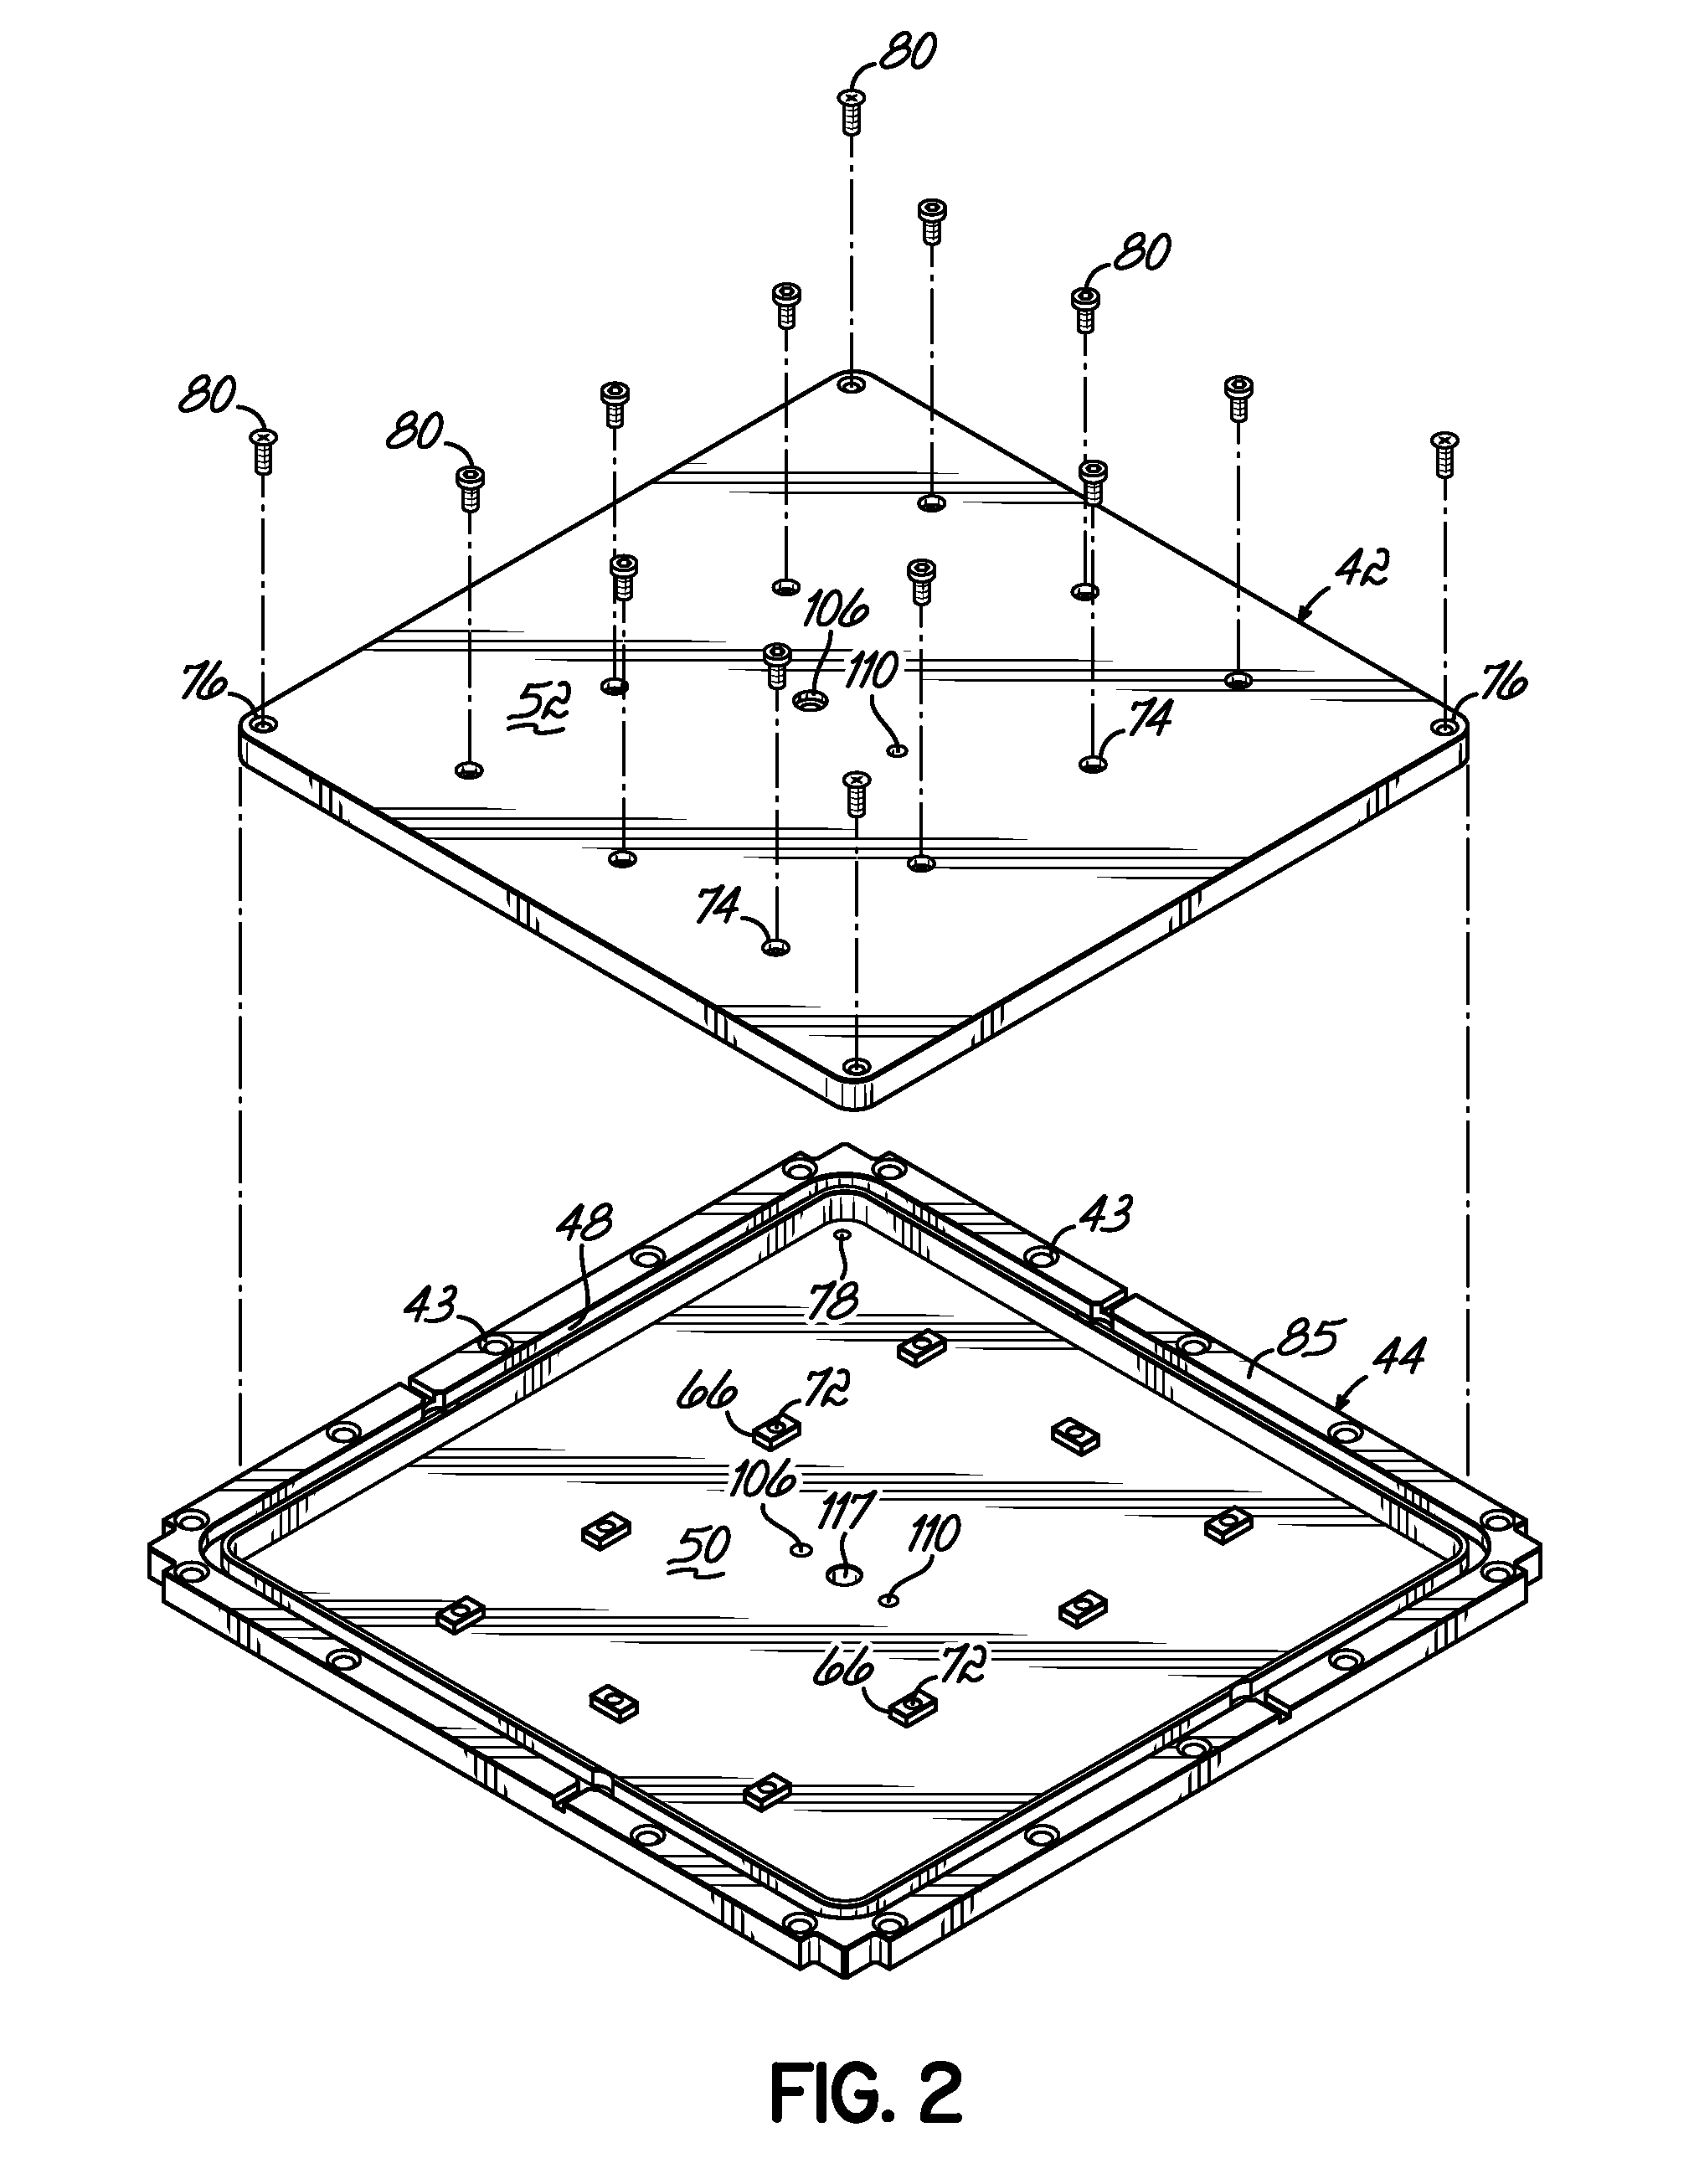 Apparatus and methods for managing the temperature of a substrate in a high vacuum processing system